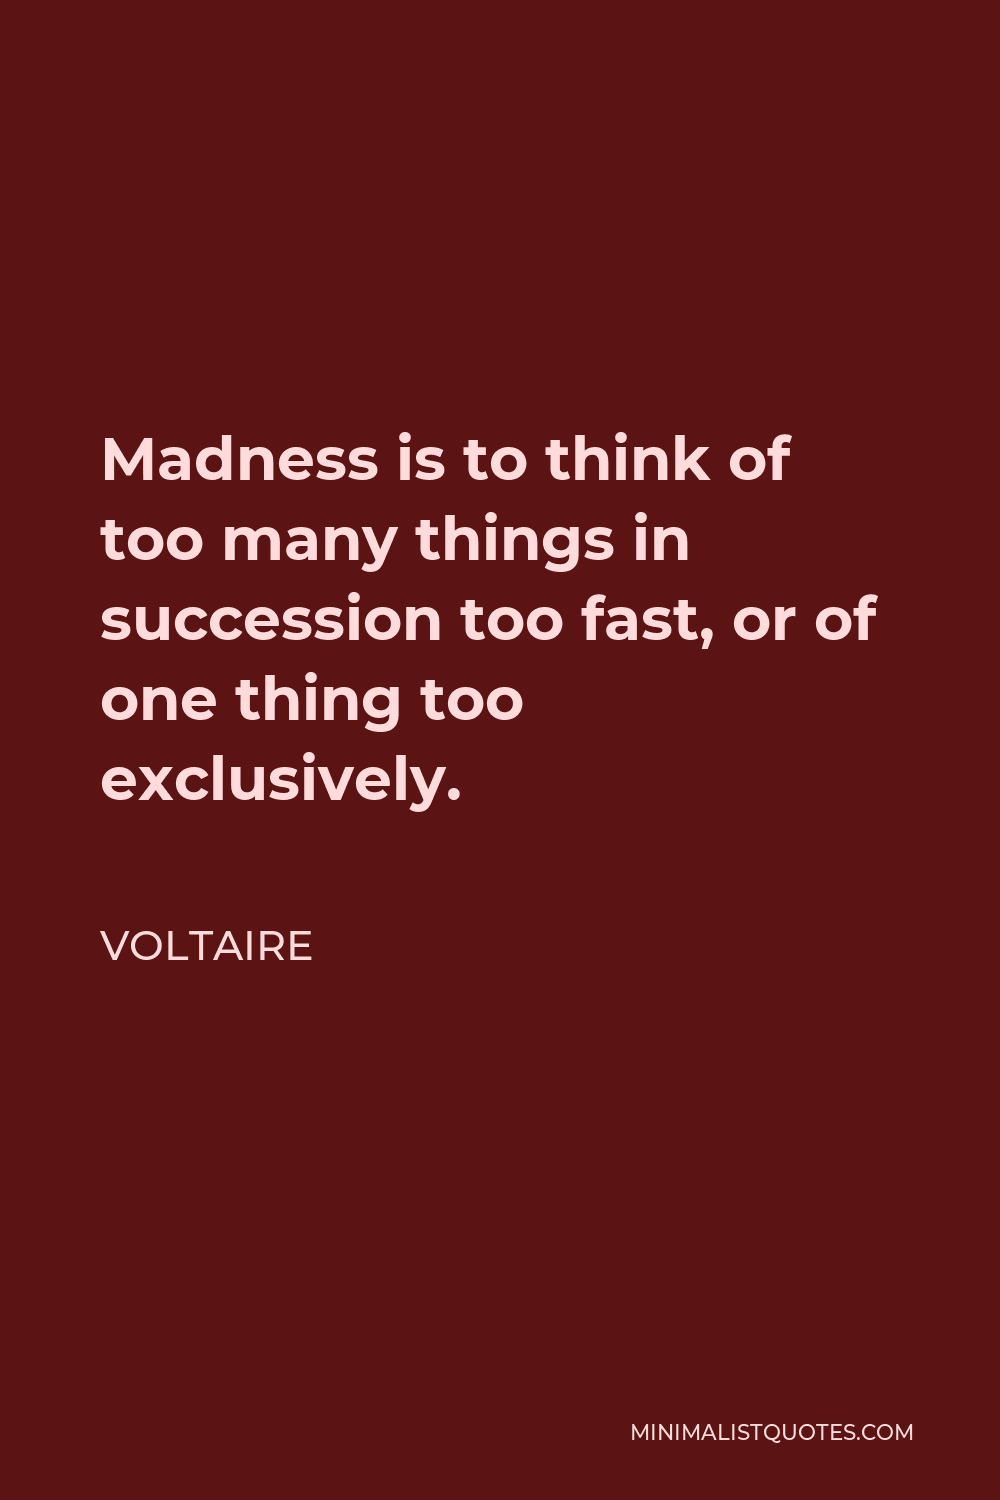 Voltaire Quote - Madness is to think of too many things in succession too fast, or of one thing too exclusively.